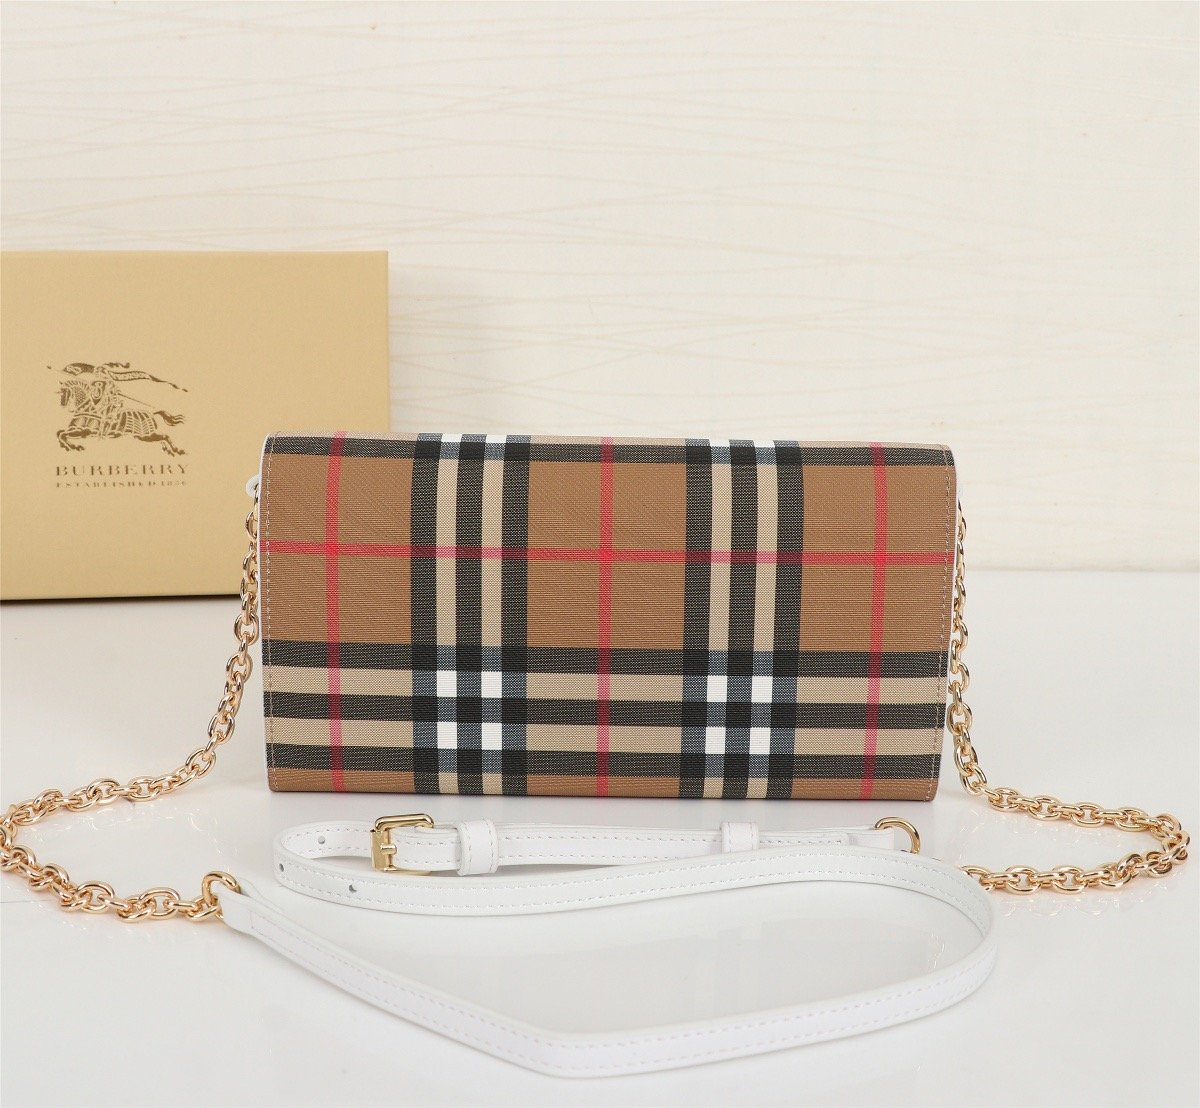 EI -New Arrival Bags BBR 023